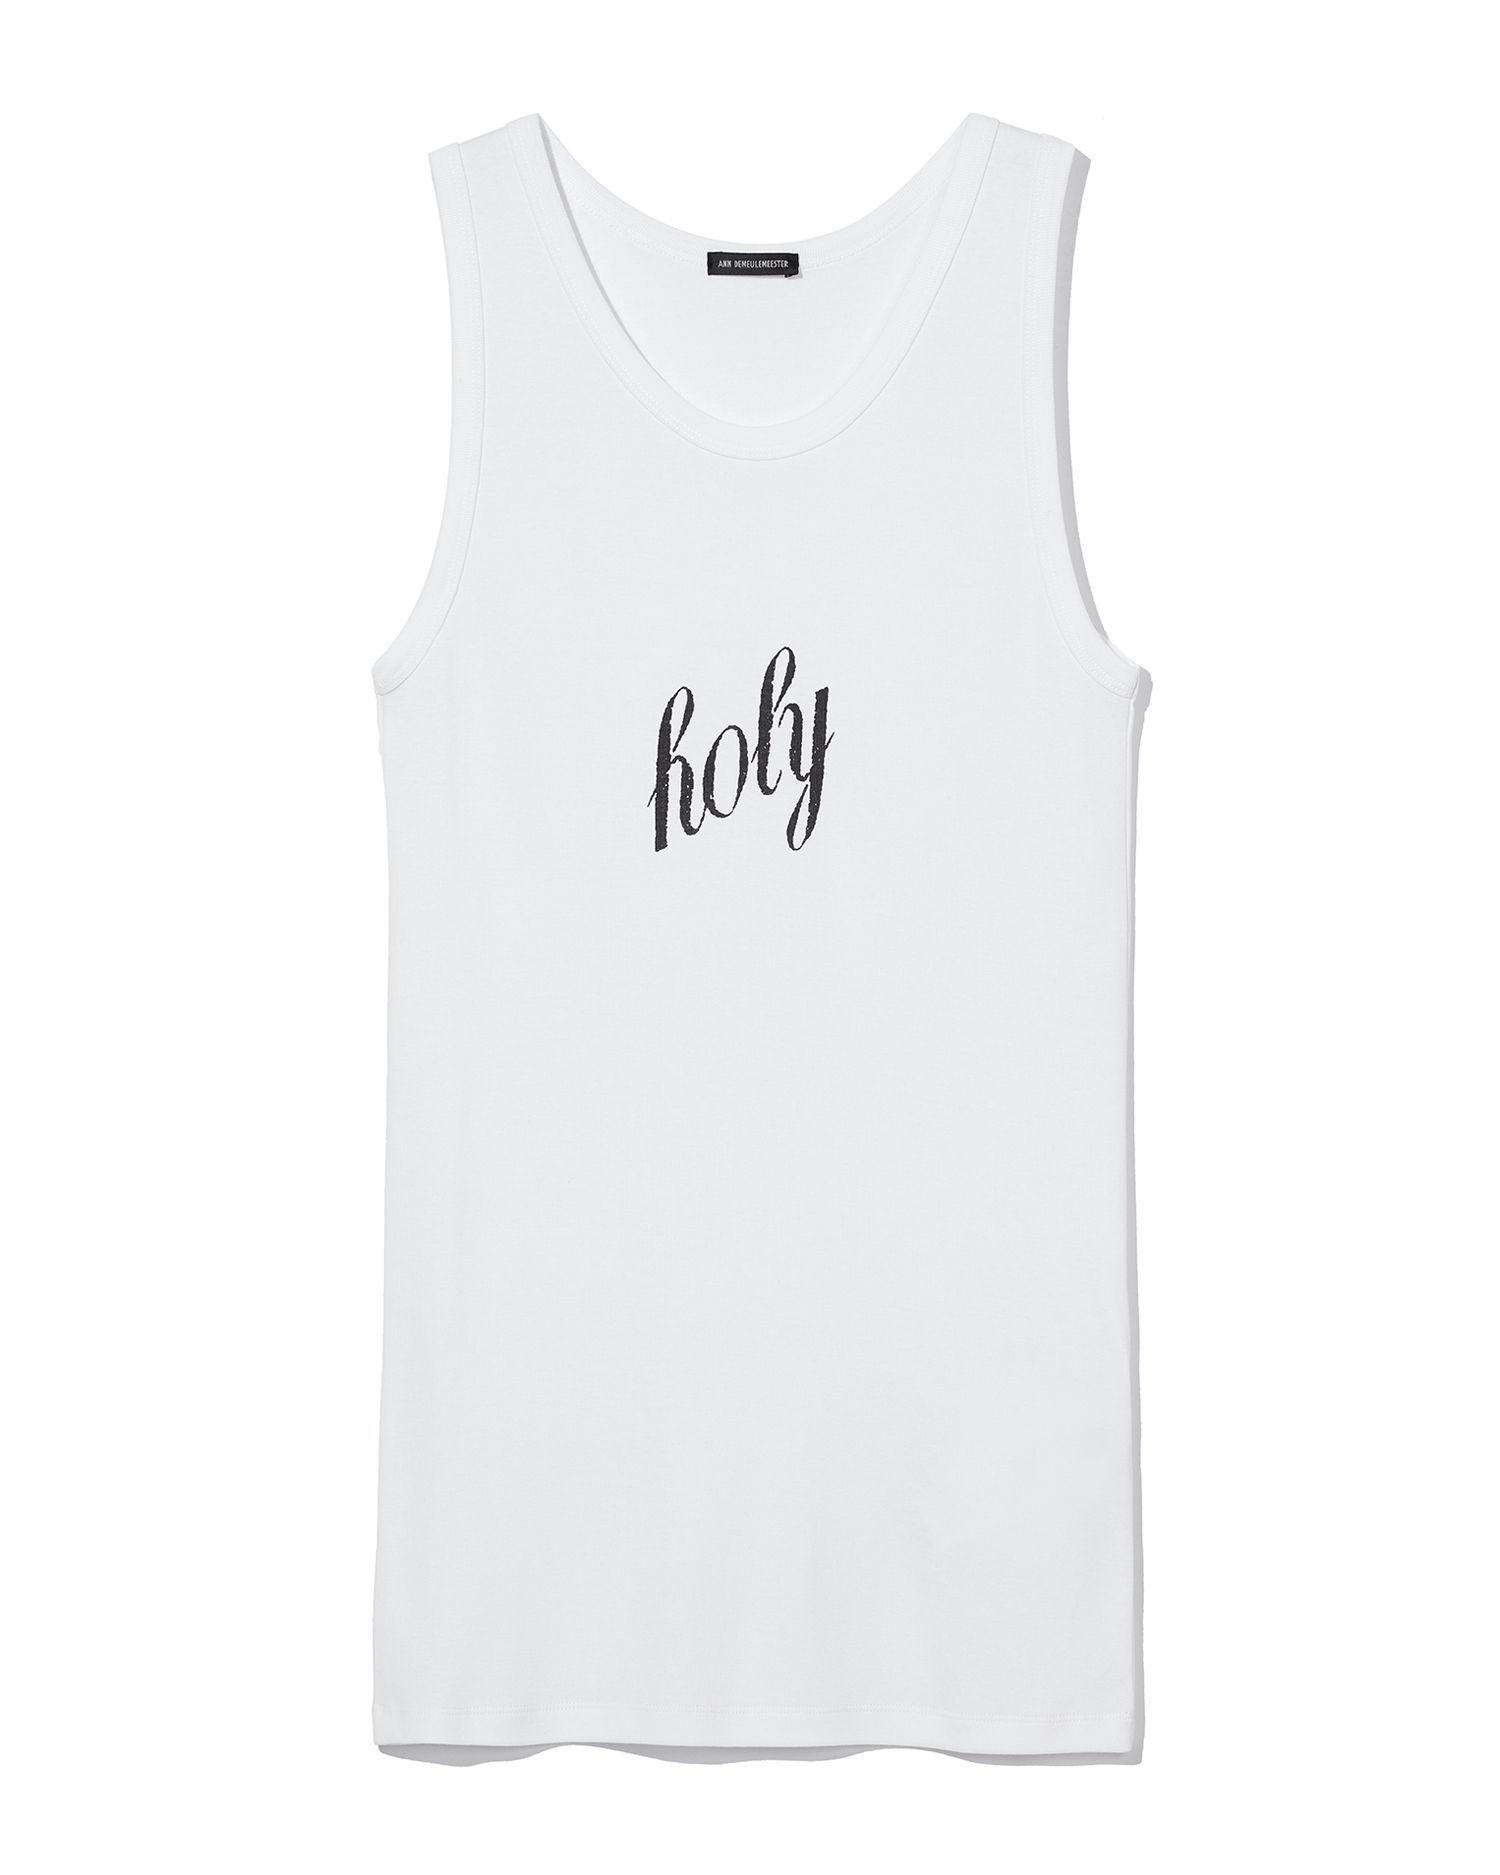 Holy tank top by ANN DEMEULEMEESTER